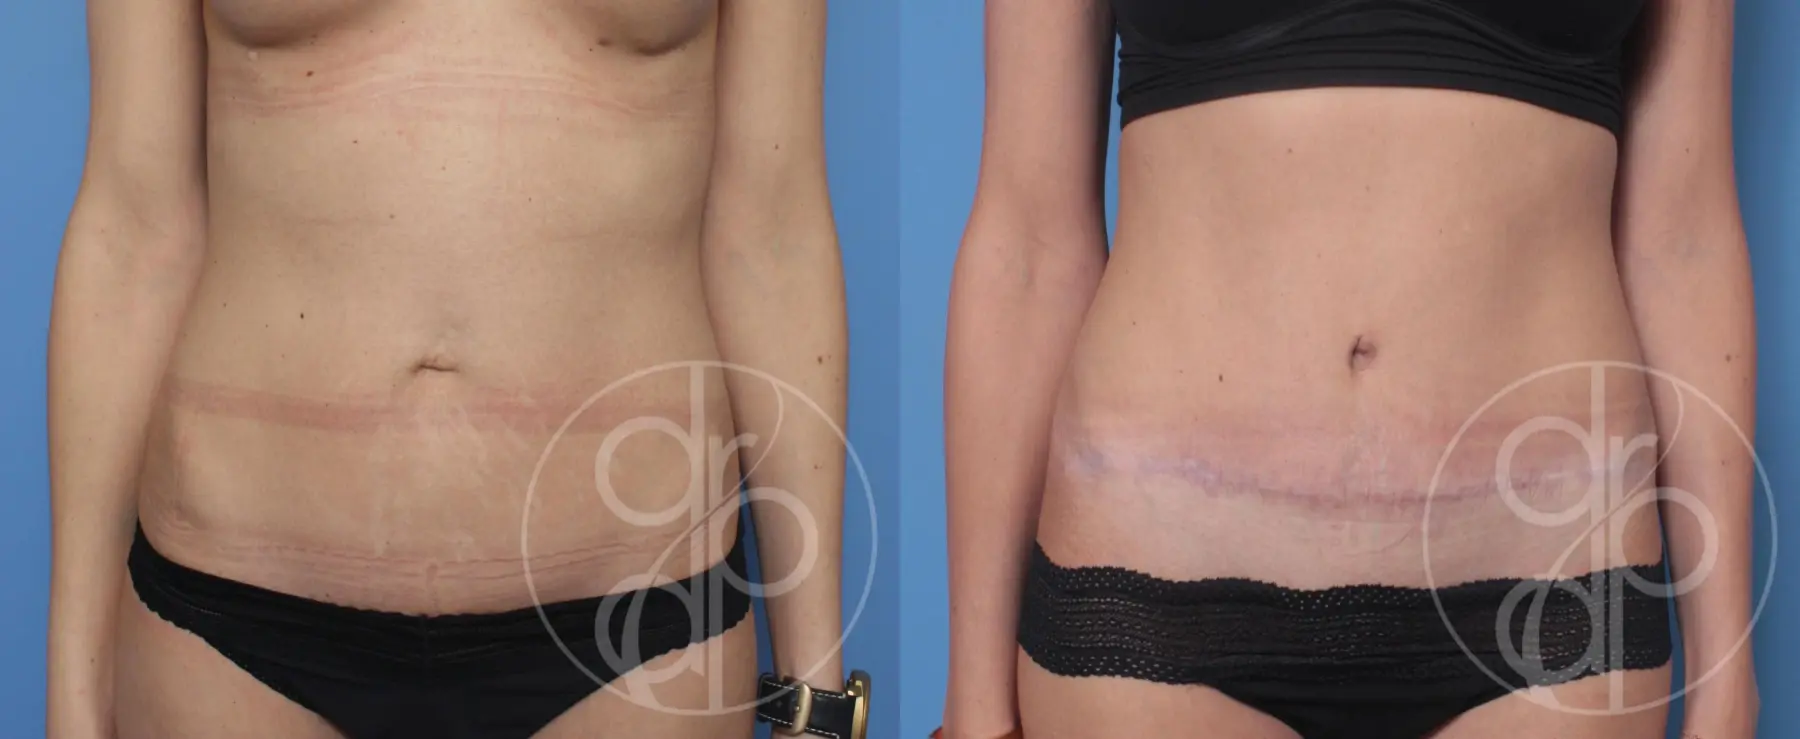 patient 10358 tummy tuck before and after result - Before and After